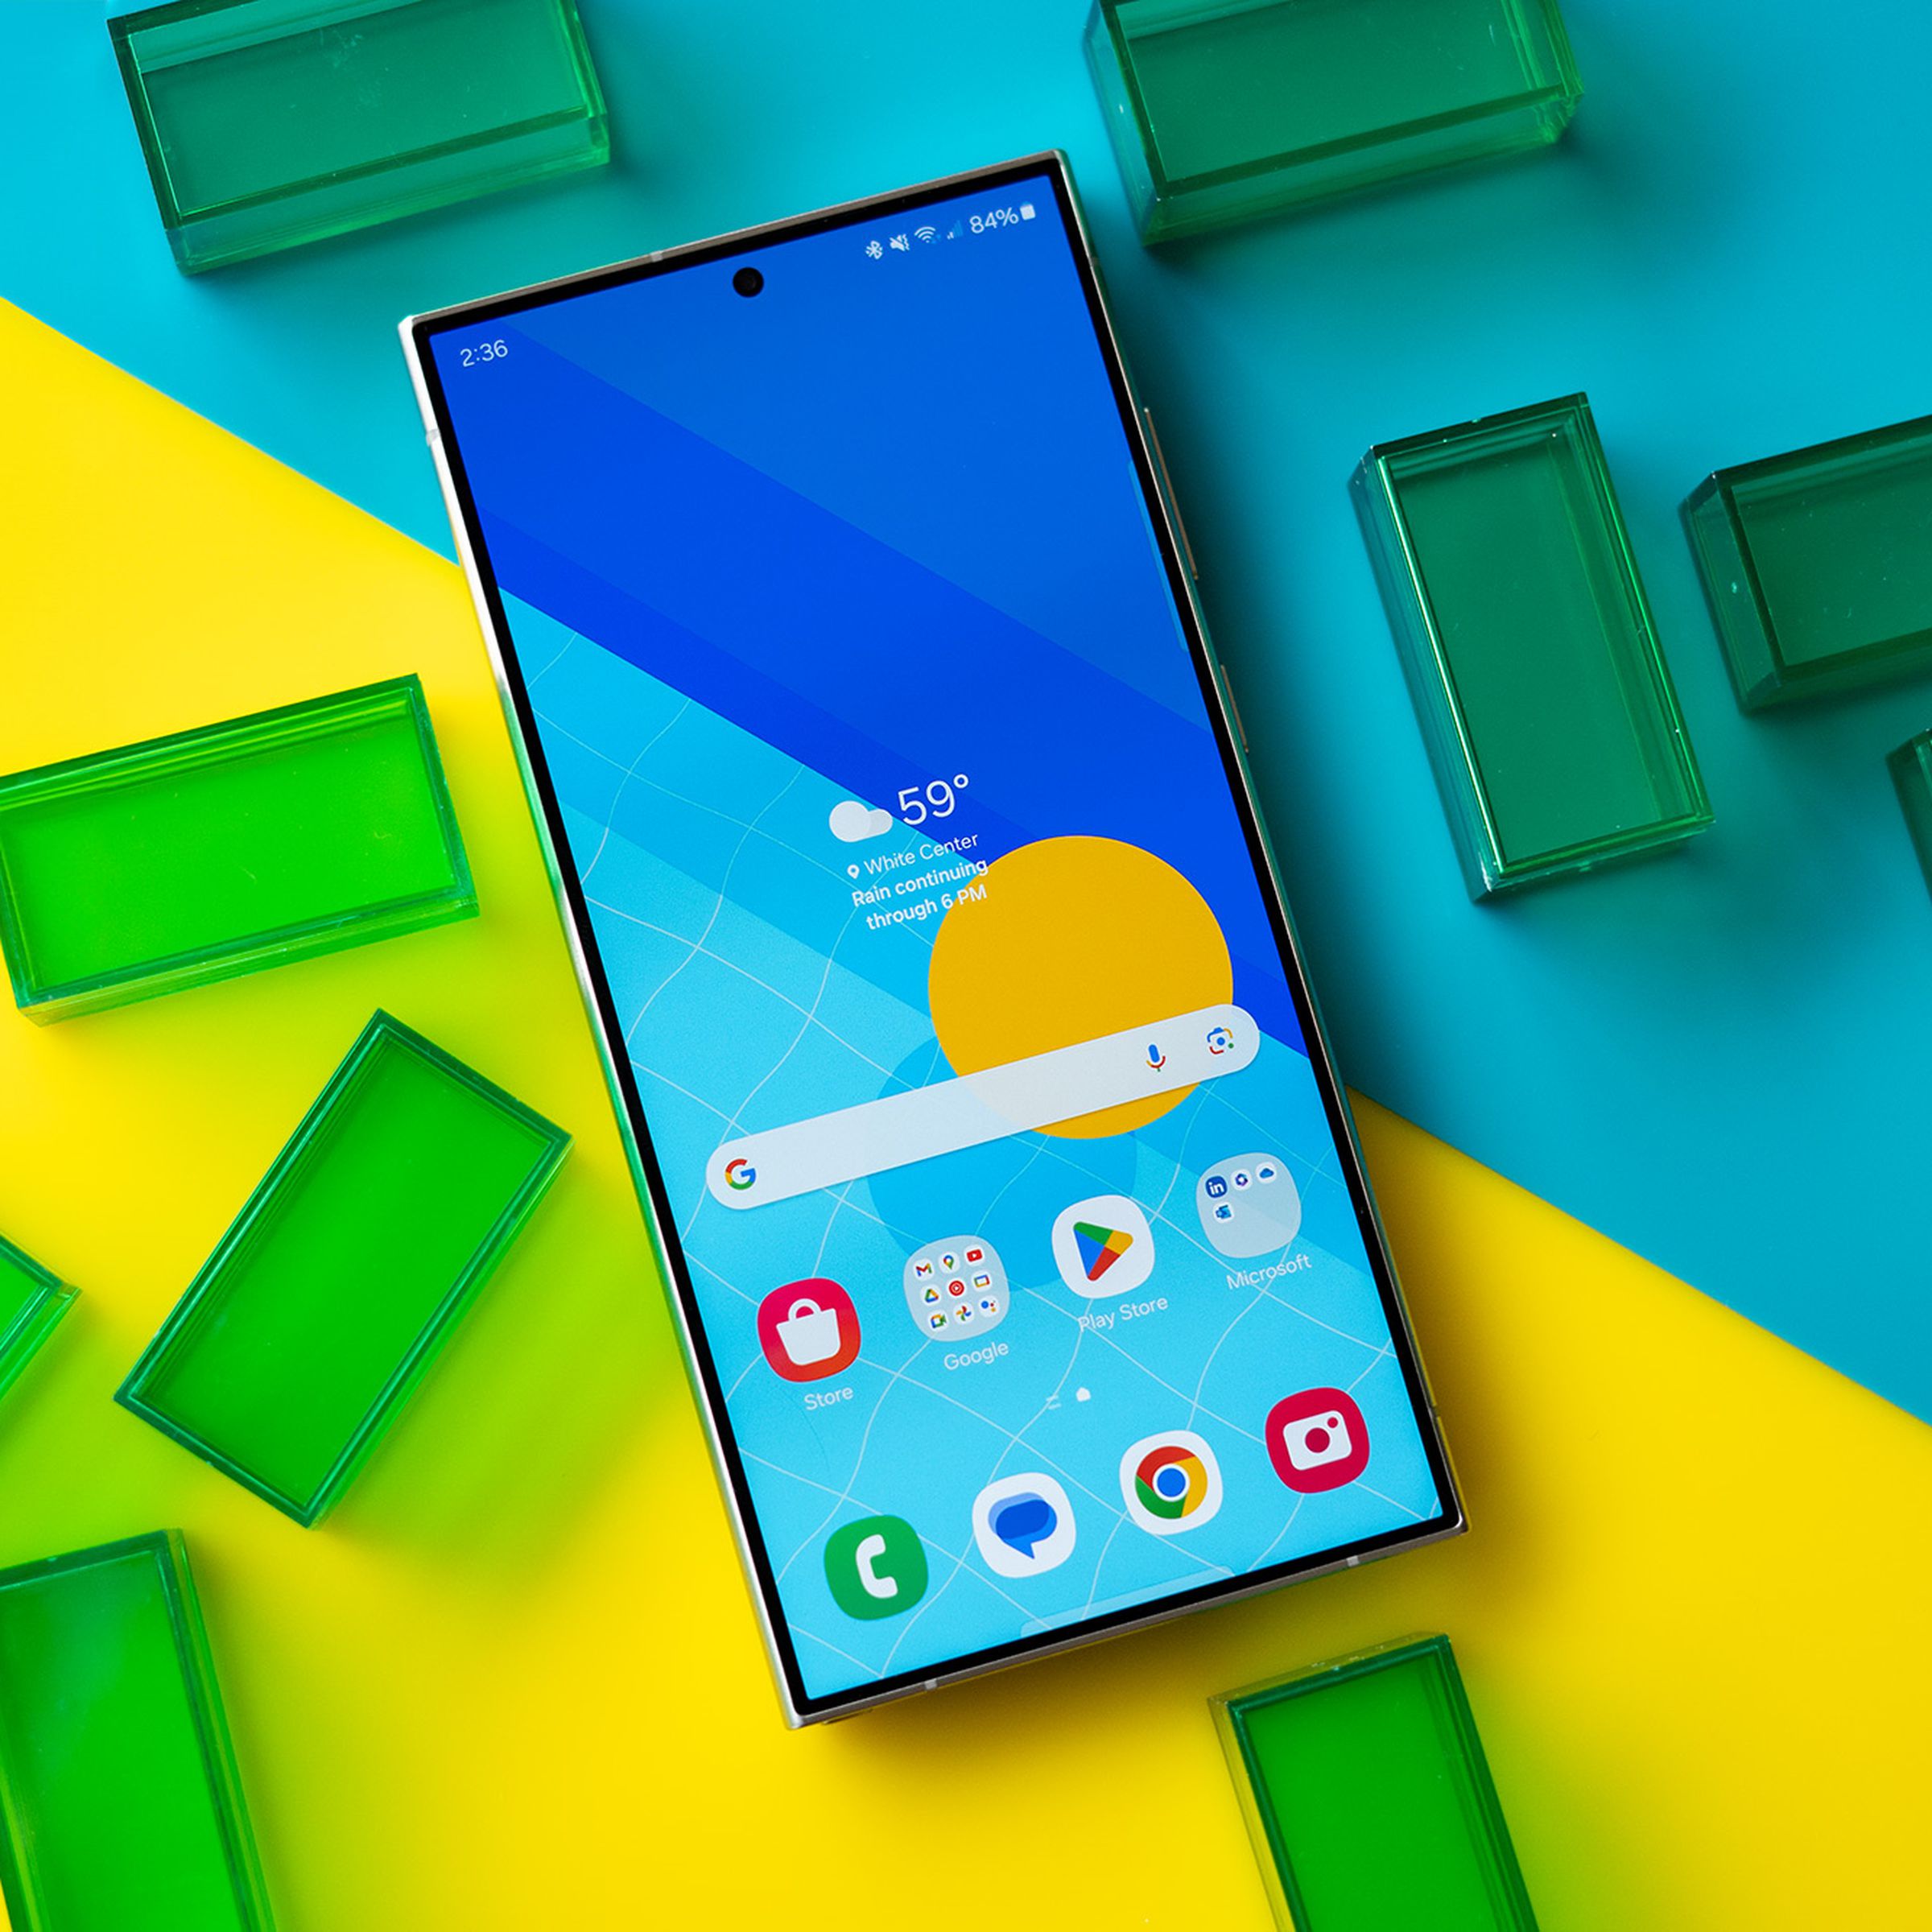 Samsung Galaxy S24 Ultra showing a blue and yellow homescreen, on a blue and yellow background with green translucent rectangles.